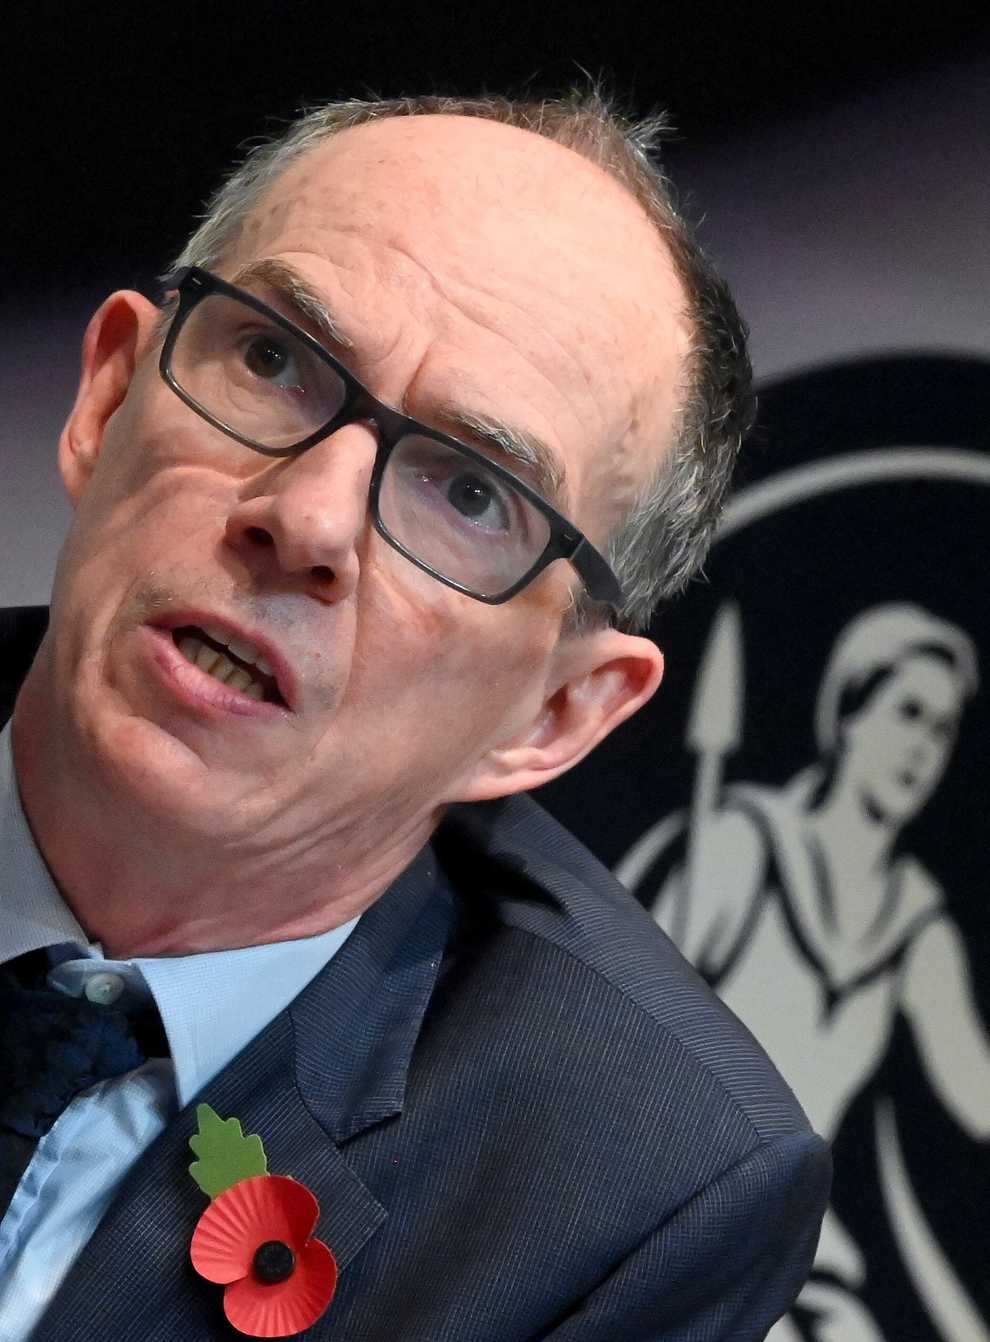 The deputy governor of the Bank of England has said he is ‘acutely conscious’ that raising interest rates is adding to the hardship faced by millions of households and businesses amid the cost-of-living crisis (Toby Melville/ PA)